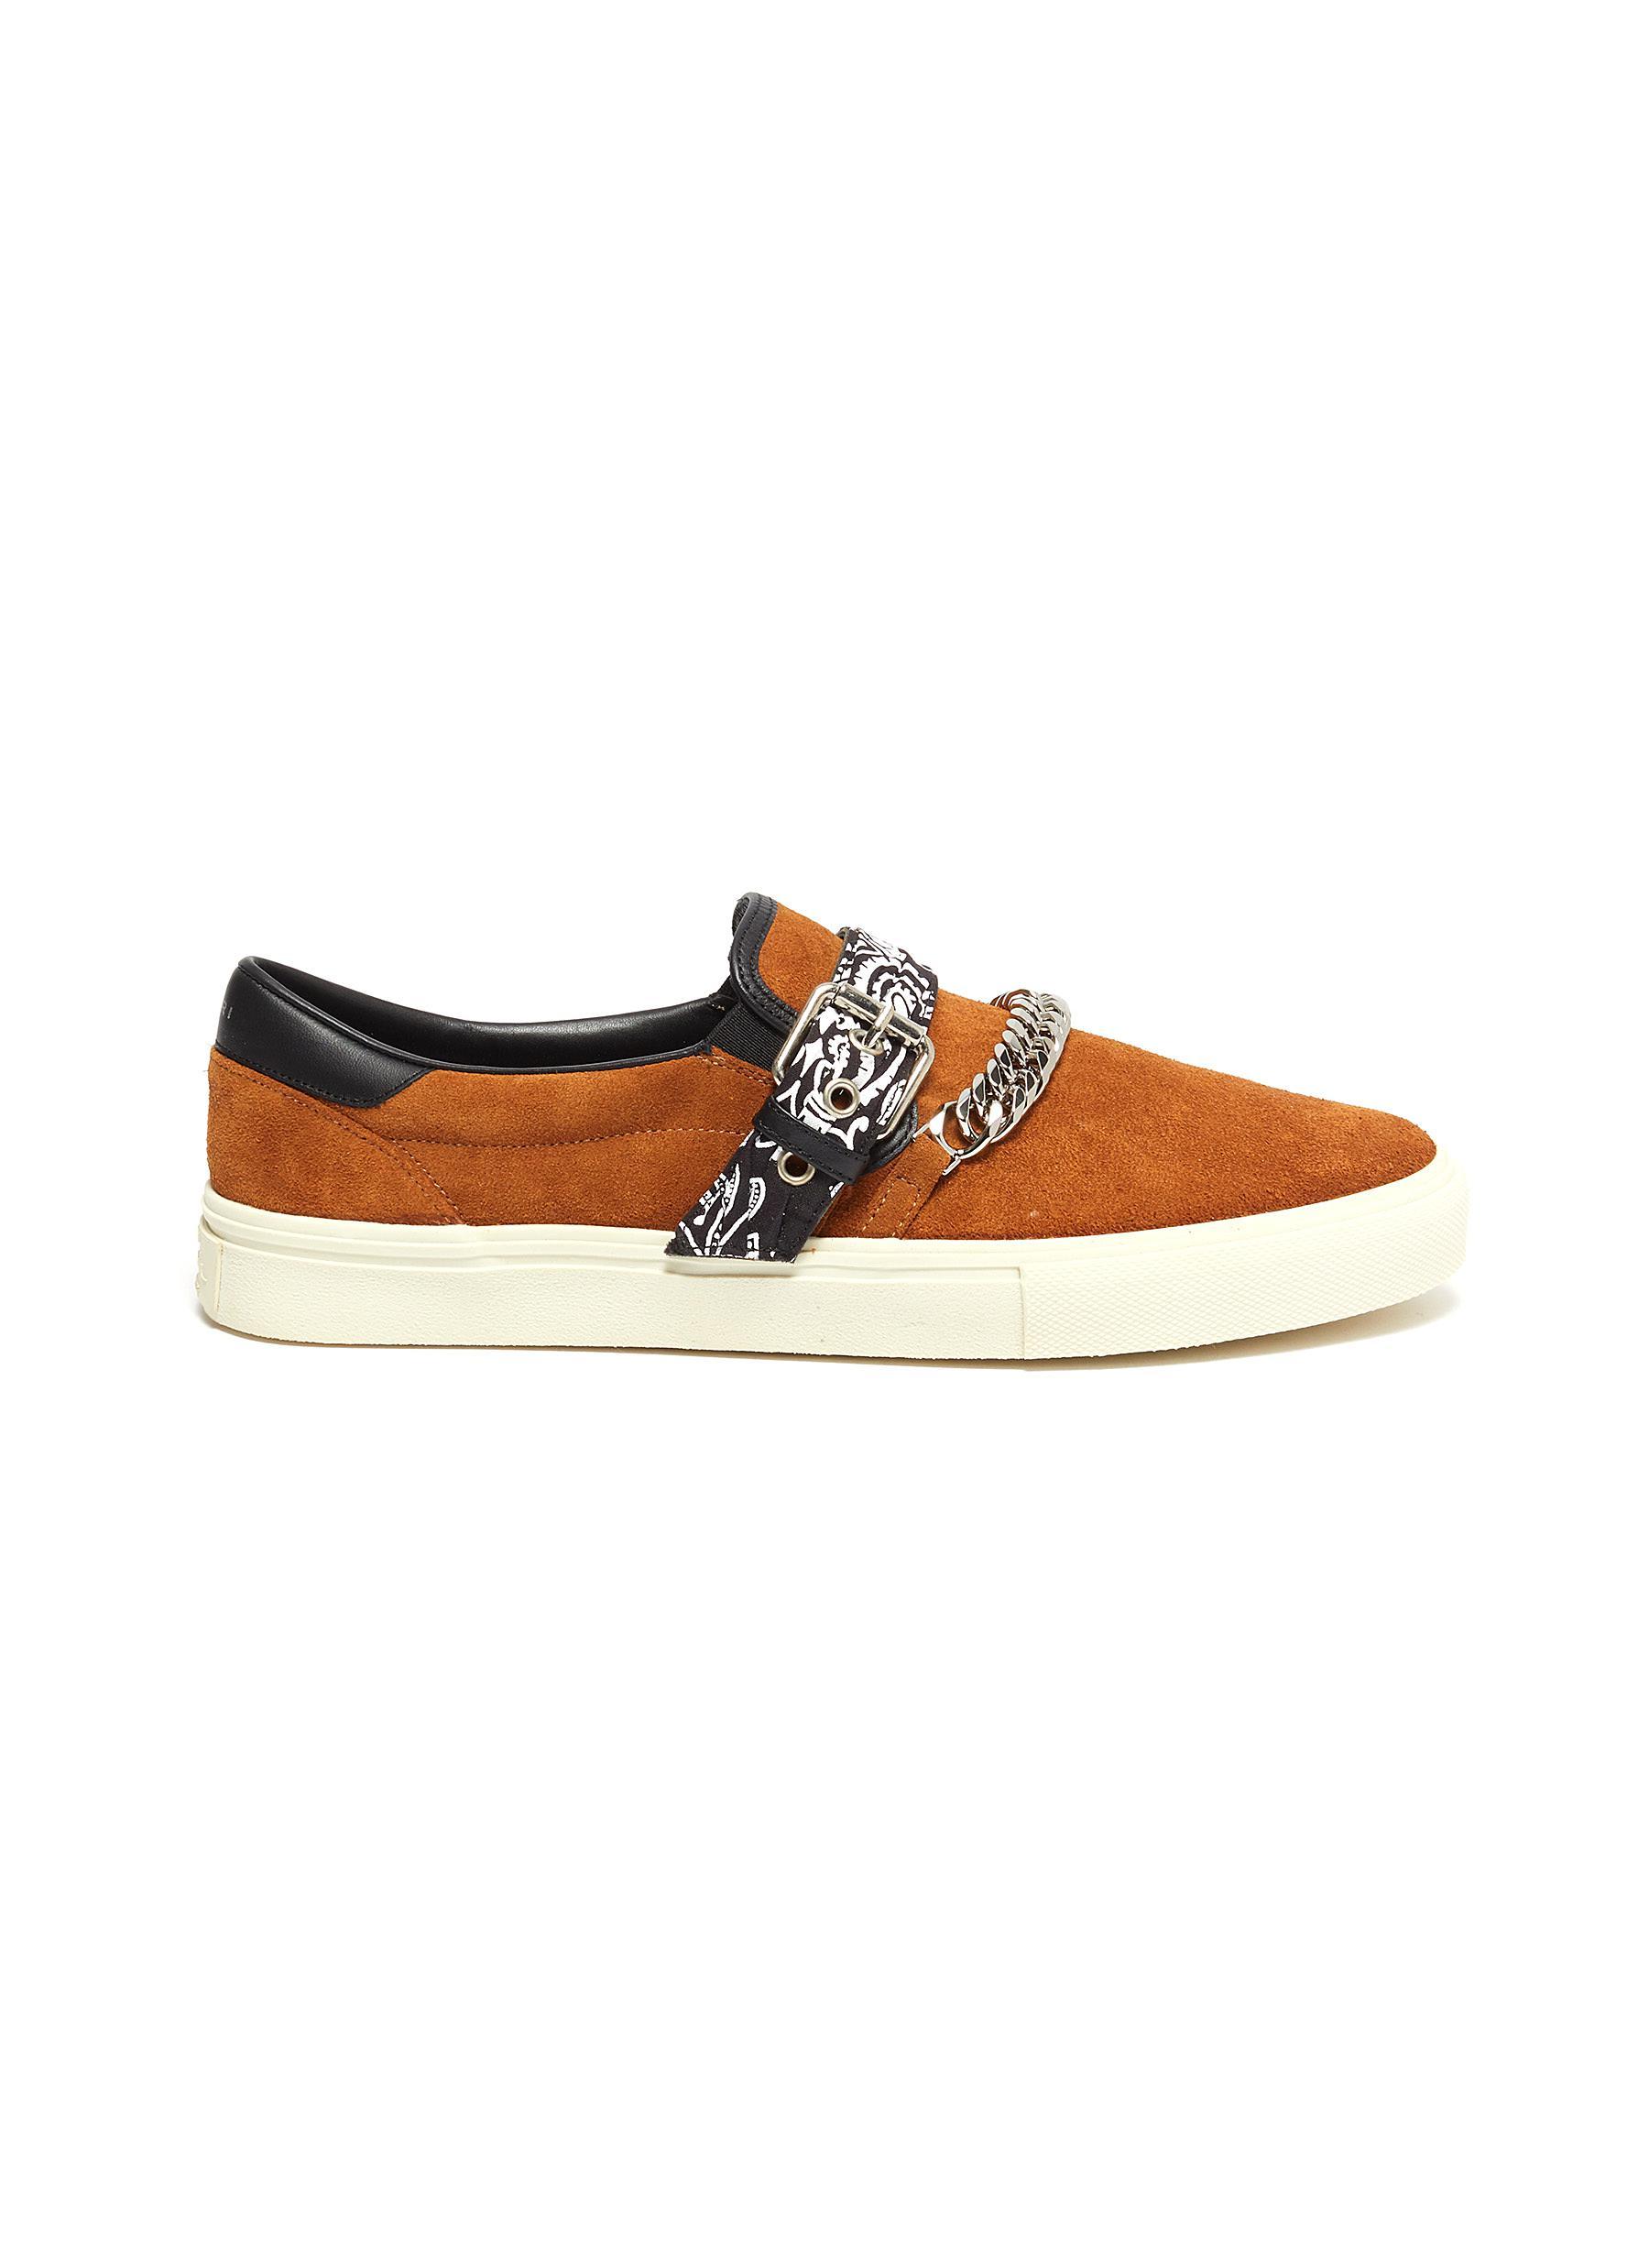 Amiri Bandana' Suede Leather Skate Sneakers in Brown for Men - Save 64% ...